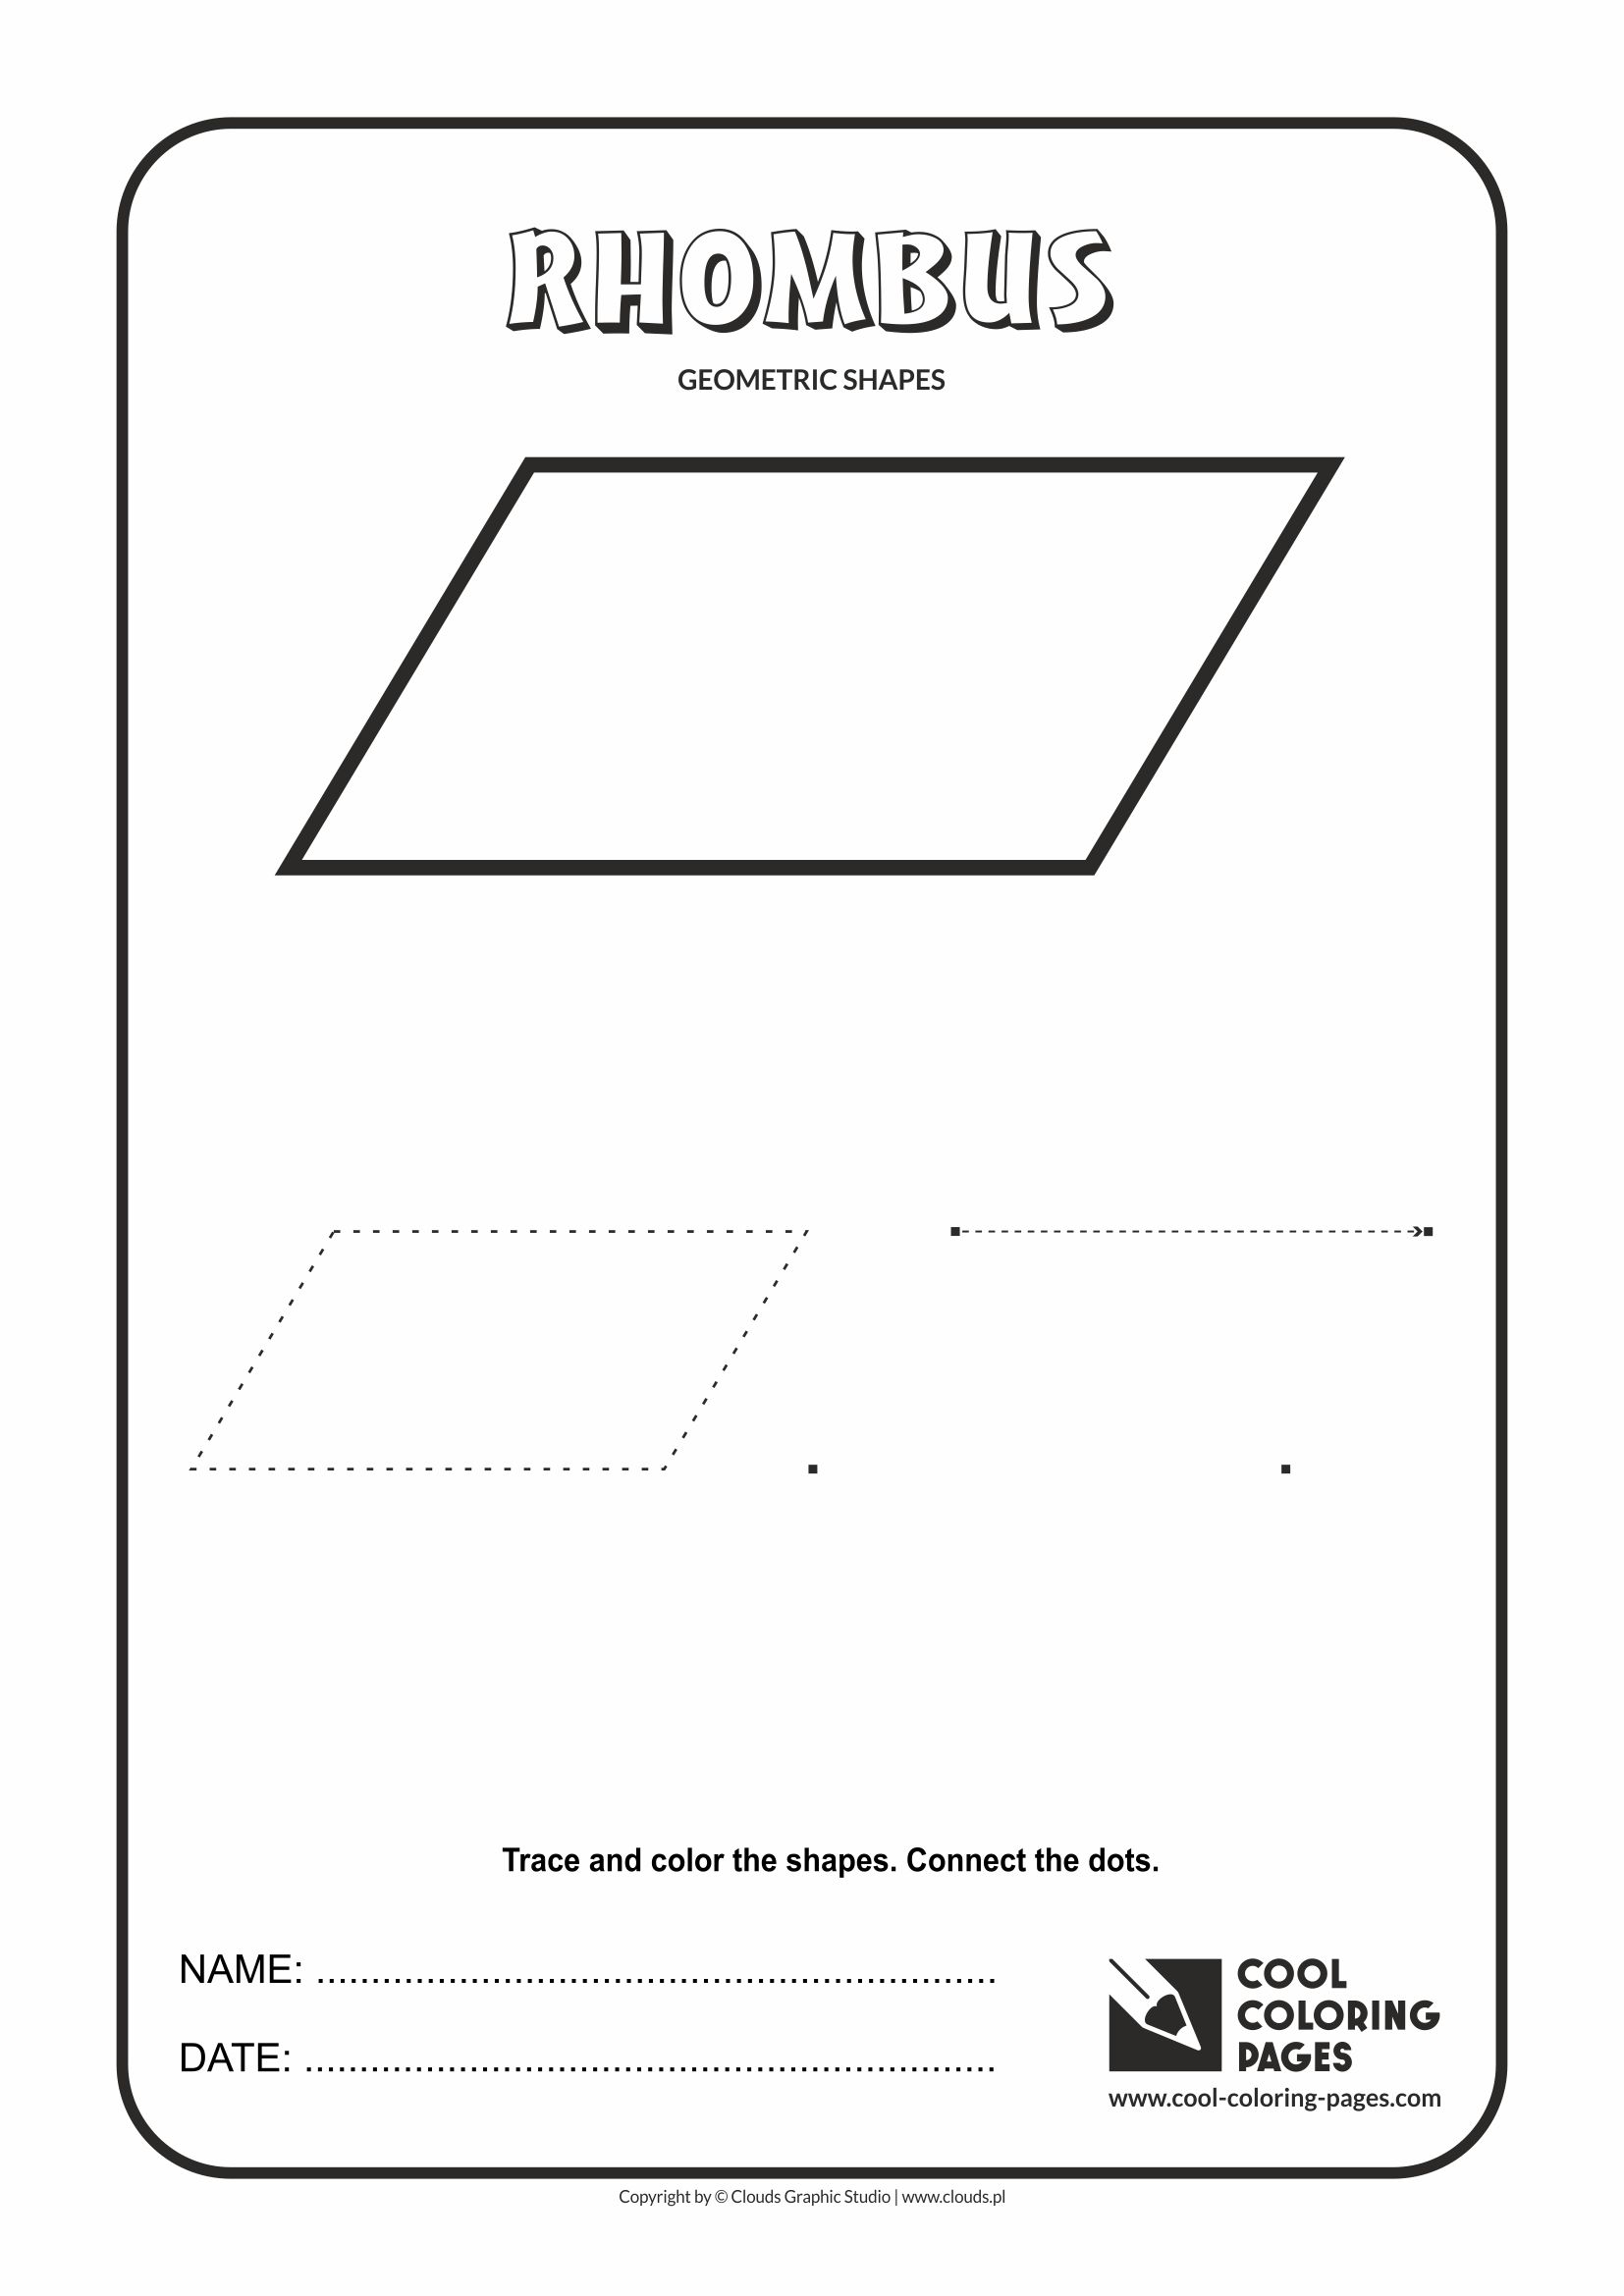 Download Cool Coloring Pages Geometric Shapes - Cool Coloring Pages | Free educational coloring pages and ...